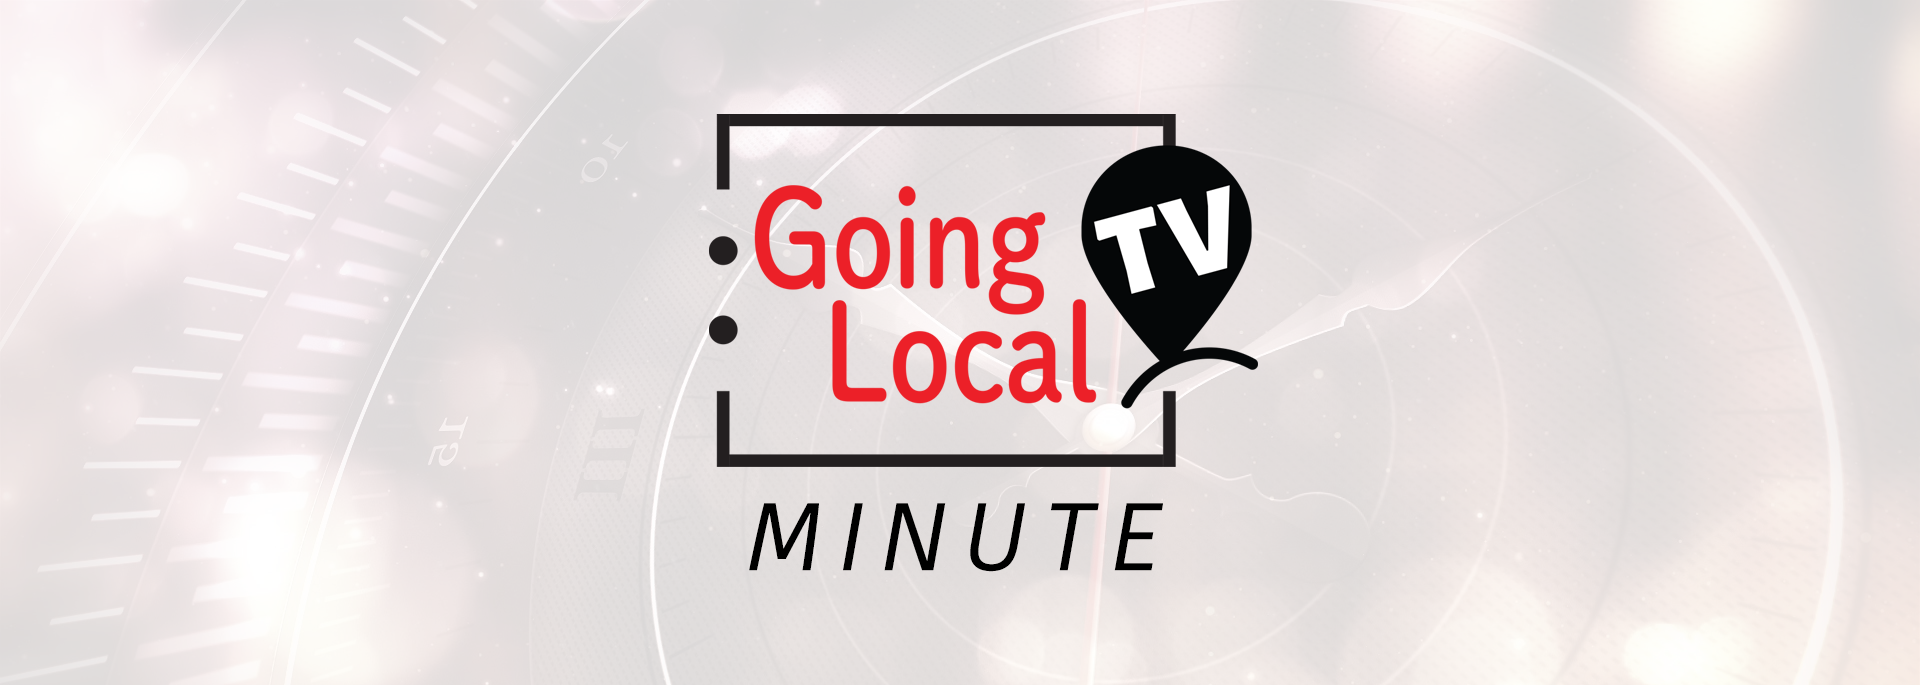 Going Local Minute channel